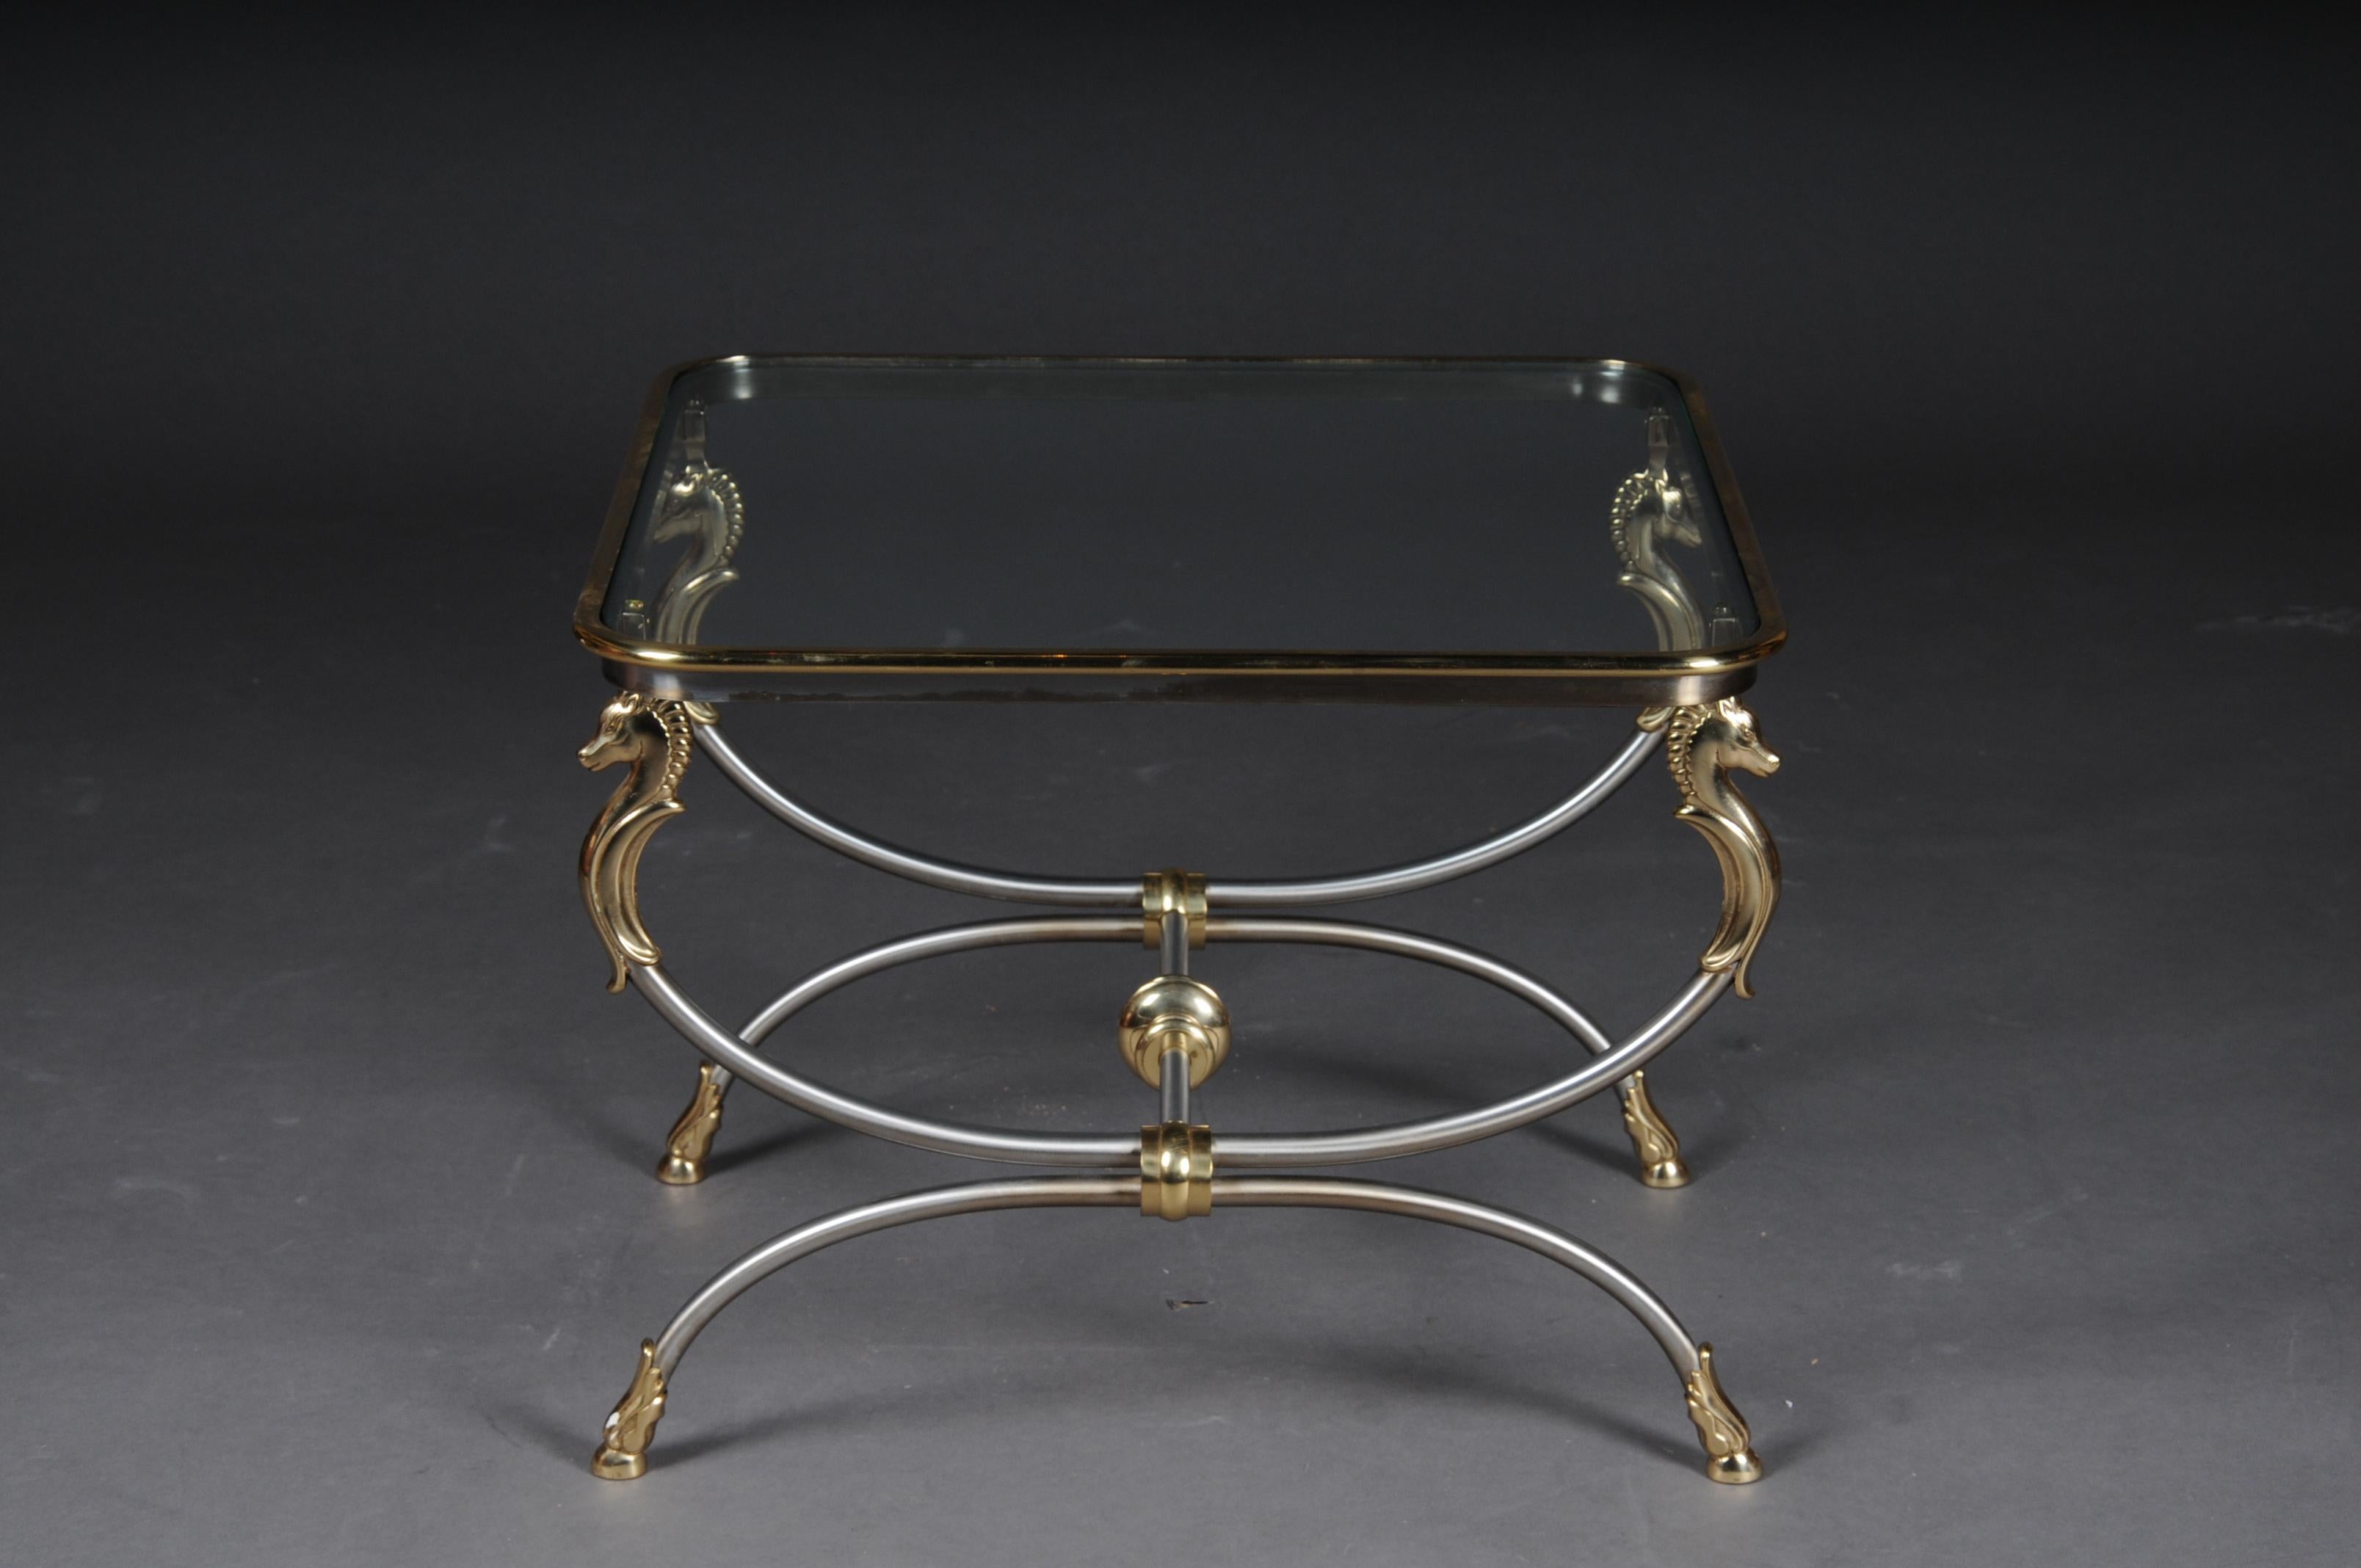 20th century modern designer side table, chrome brass, classical style

Chrome / brass frame, curved and flanked by horse busts in brass. Polished brass frame enclosed in a glass plate.

(A-168).